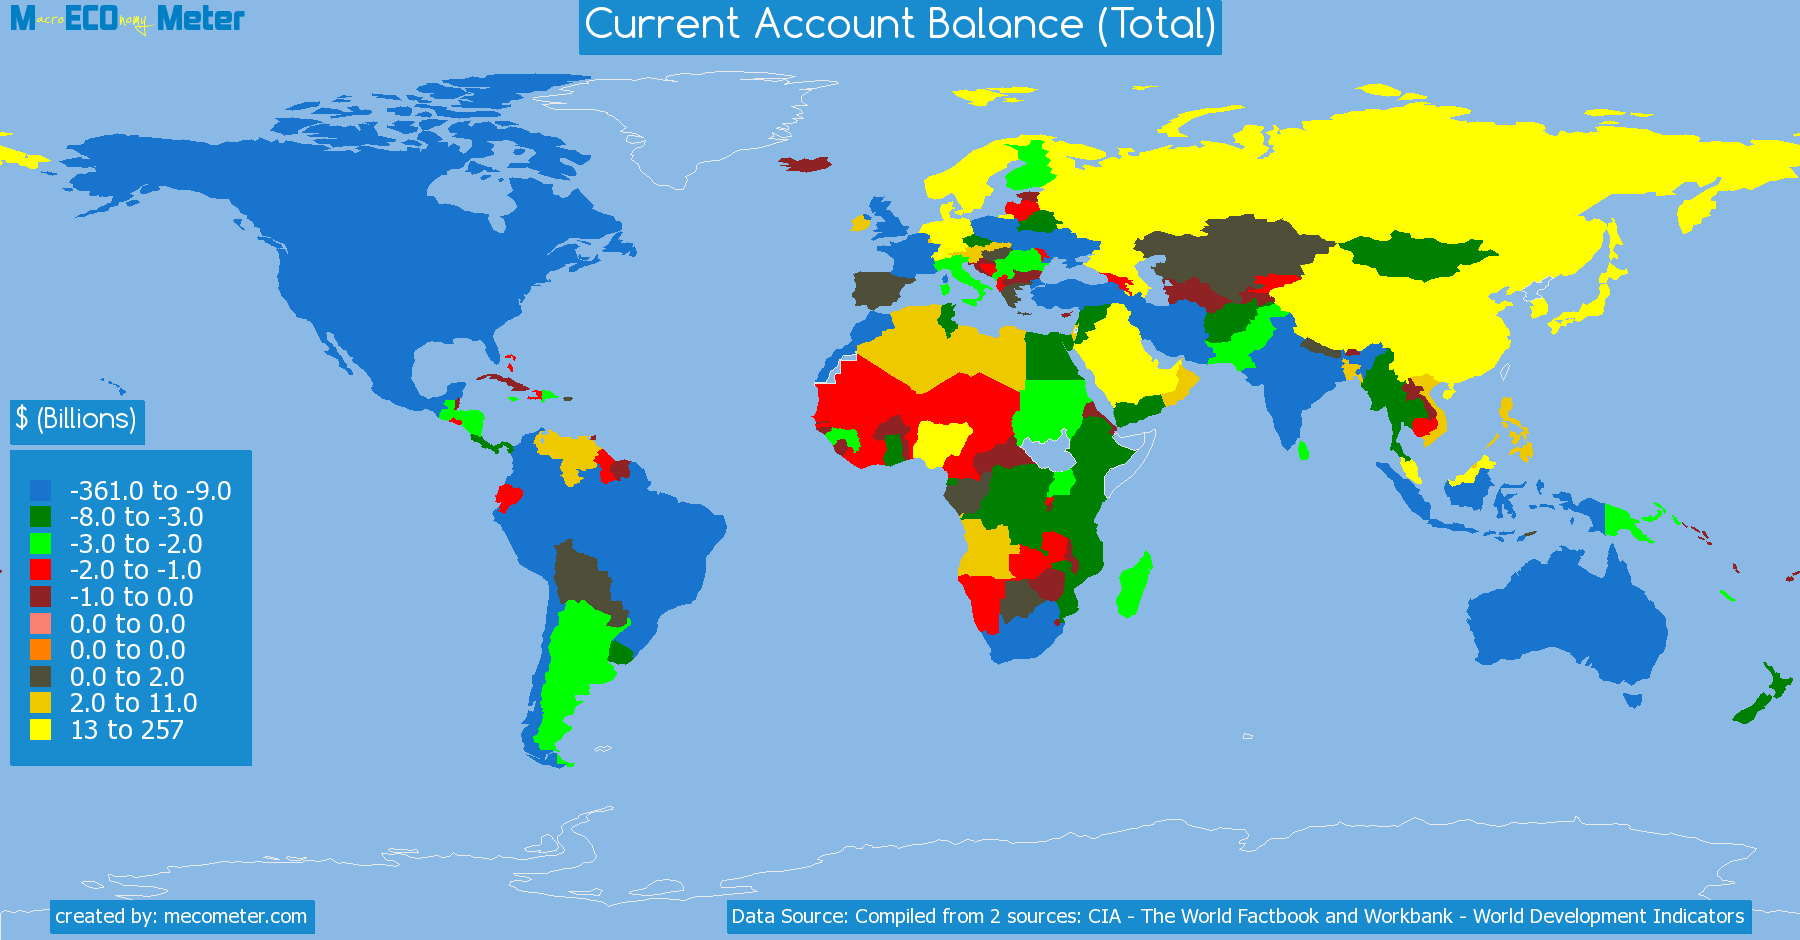 list of countries by Current Account Balance (Total)